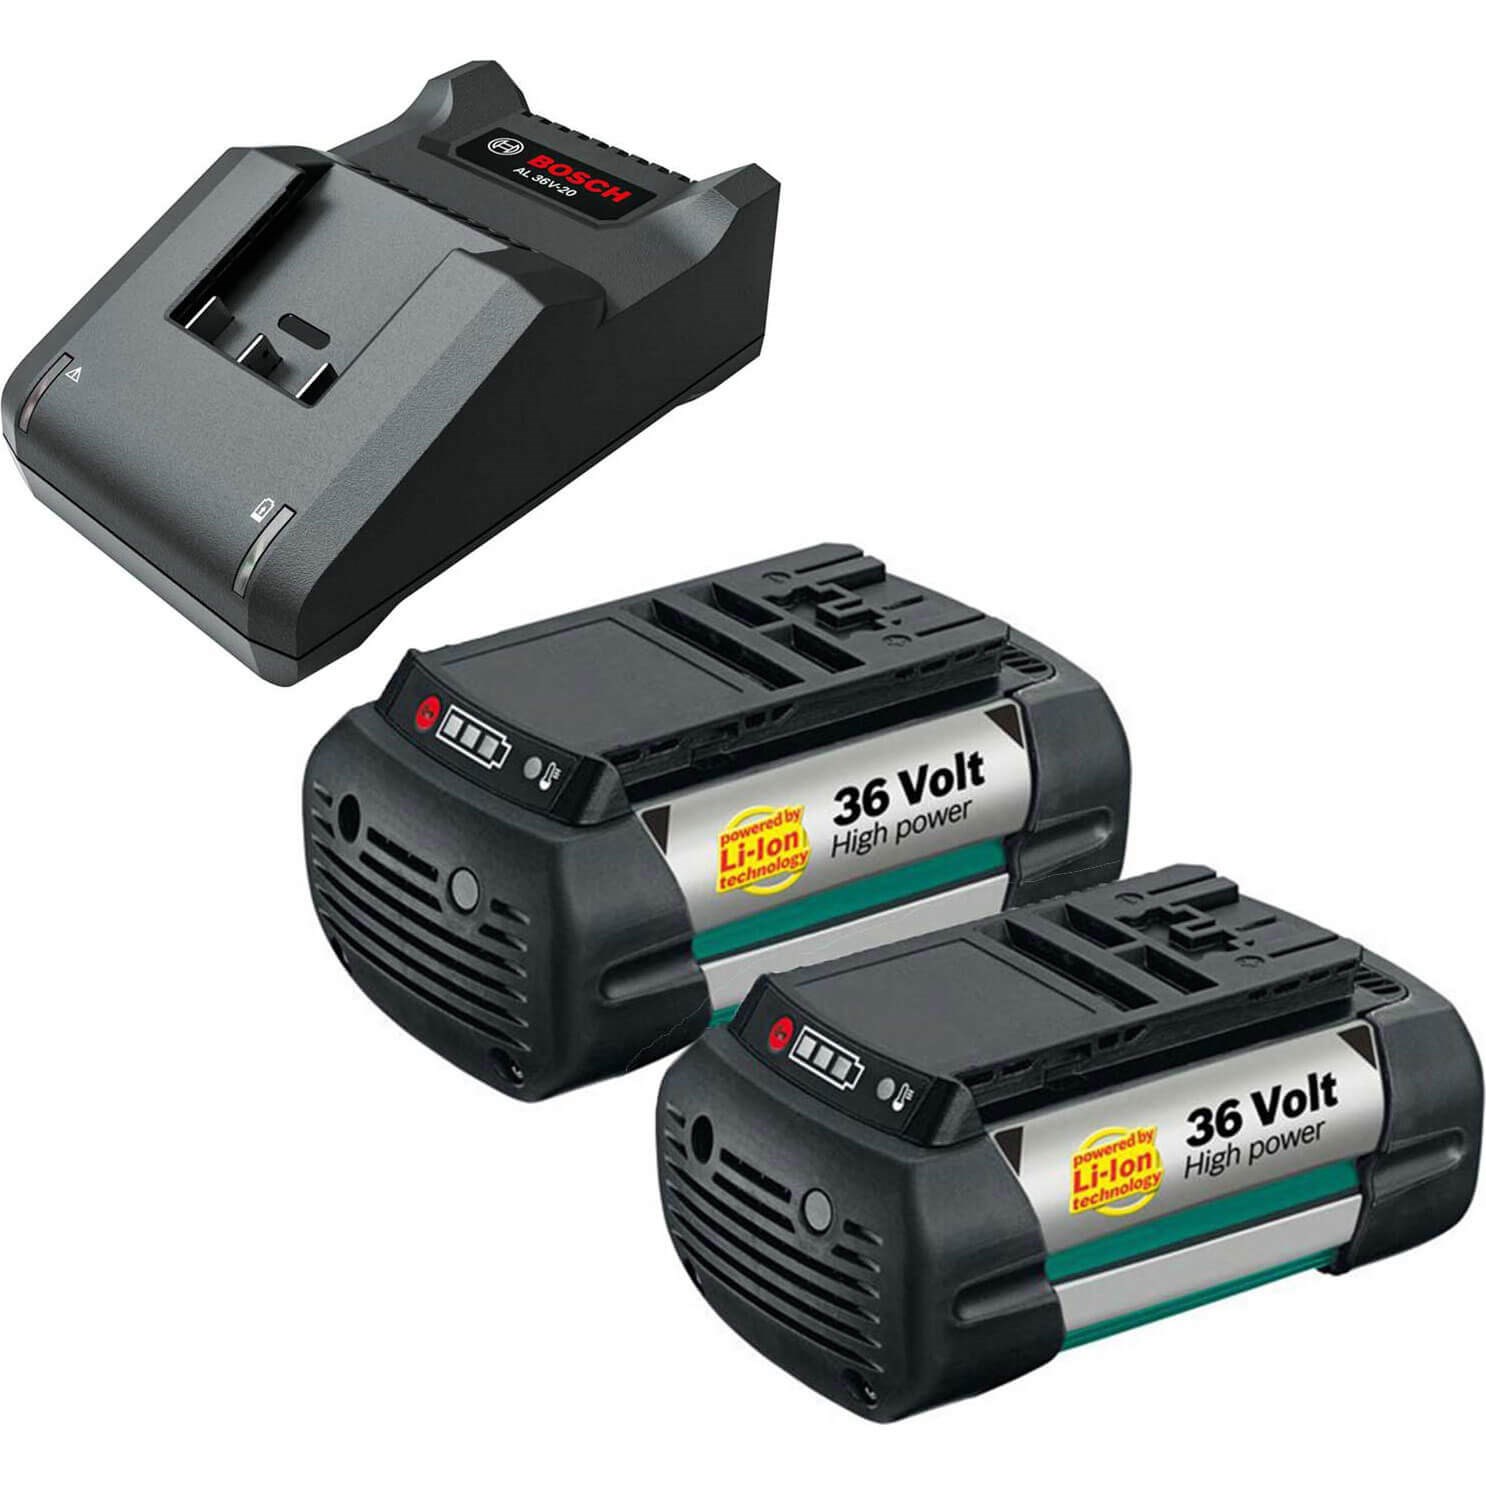 Smitsom Slid Råd Bosch Genuine GREEN 36v Cordless Twin Battery 2.6ah and Charger | Battery  Packs